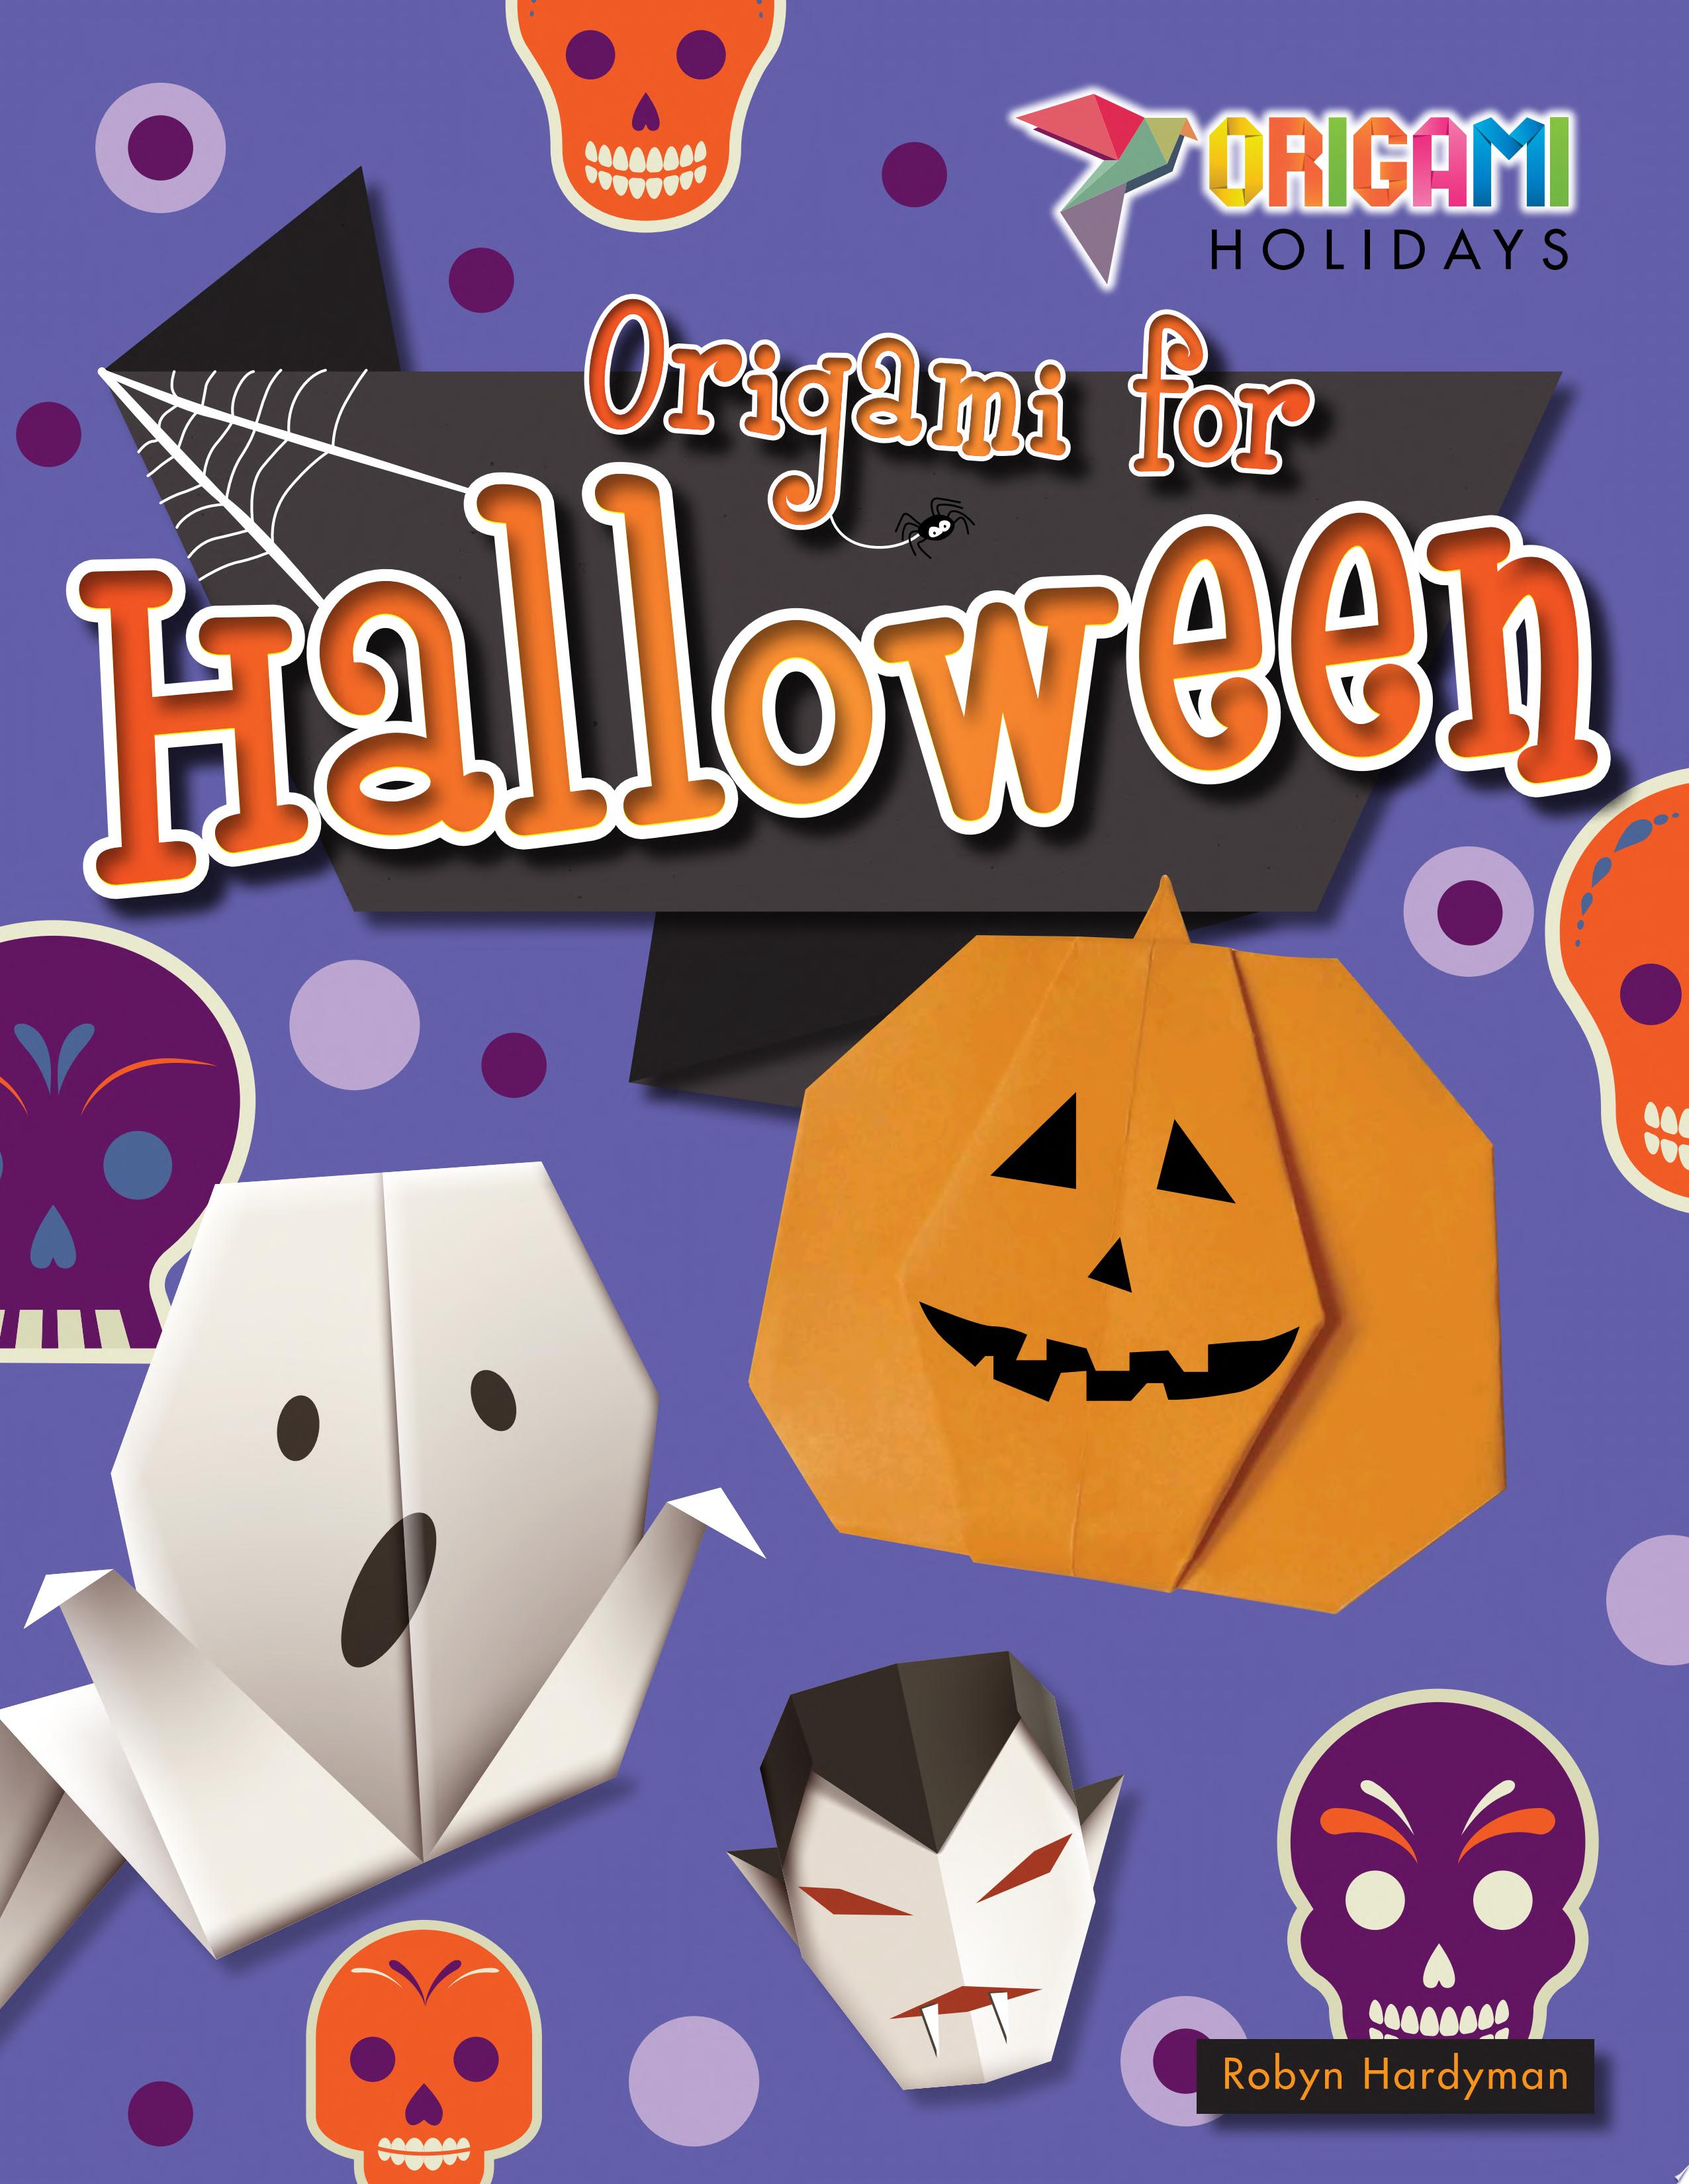 Image for "Origami for Halloween"